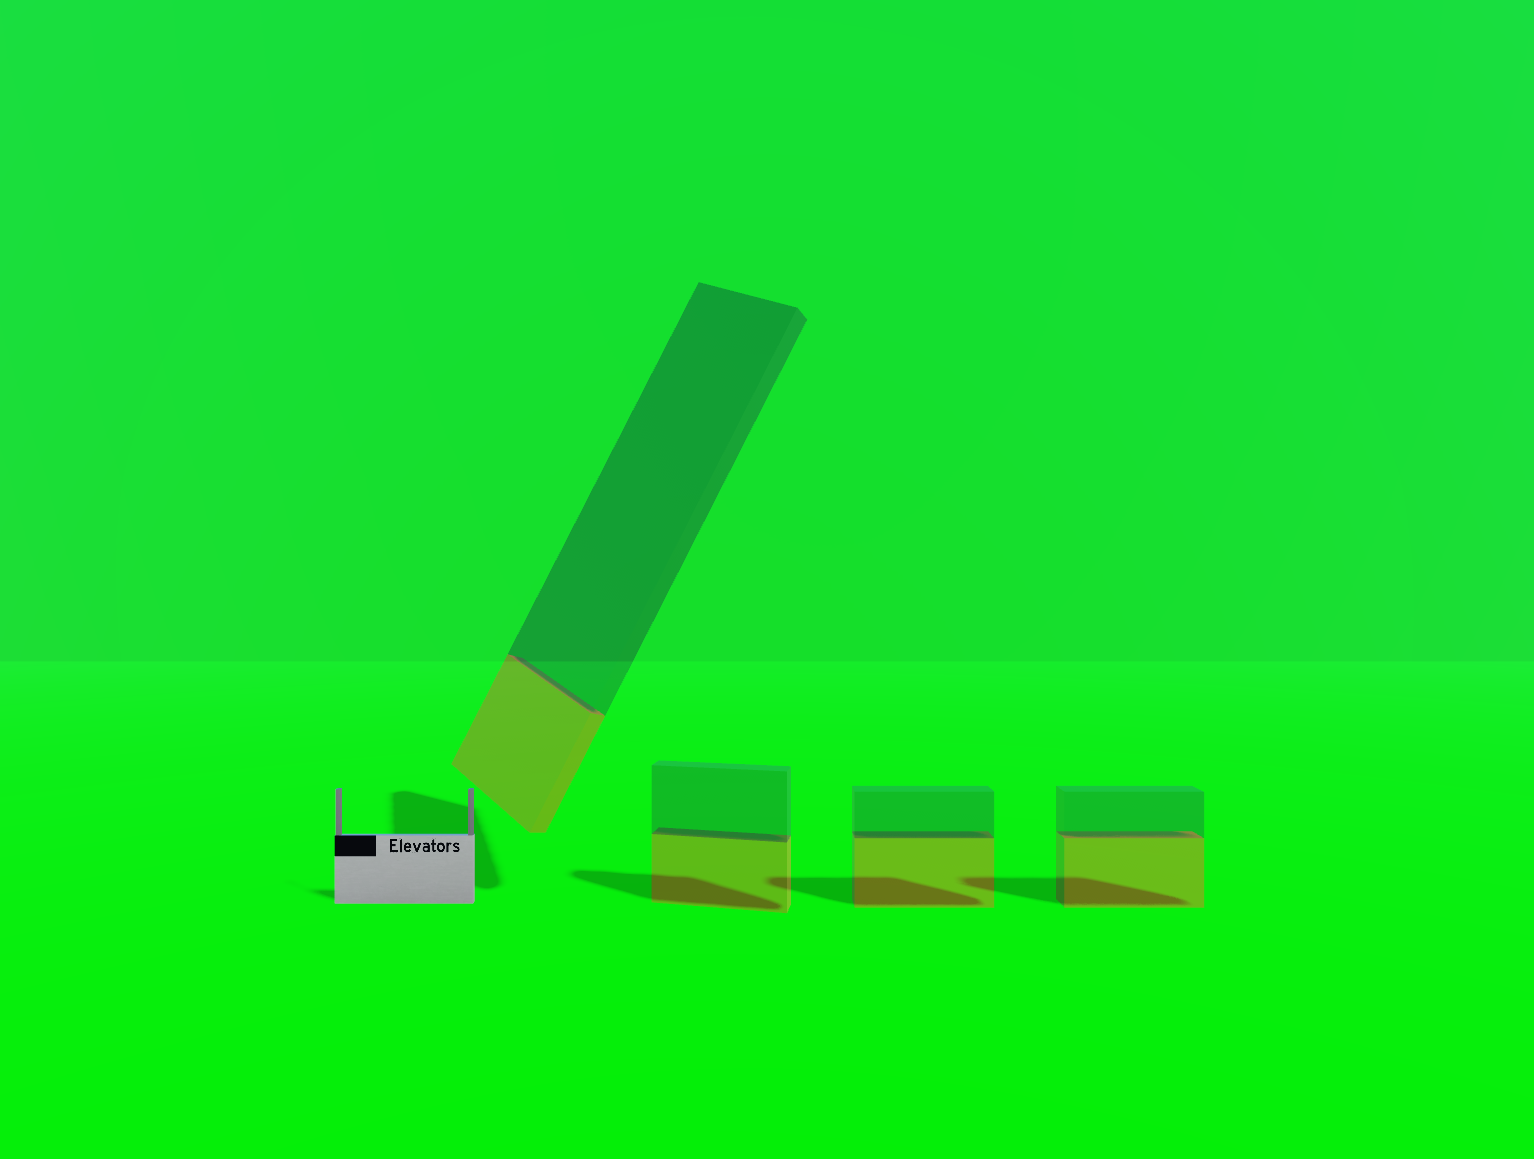 A screenshot of randomly placed and sized shapes